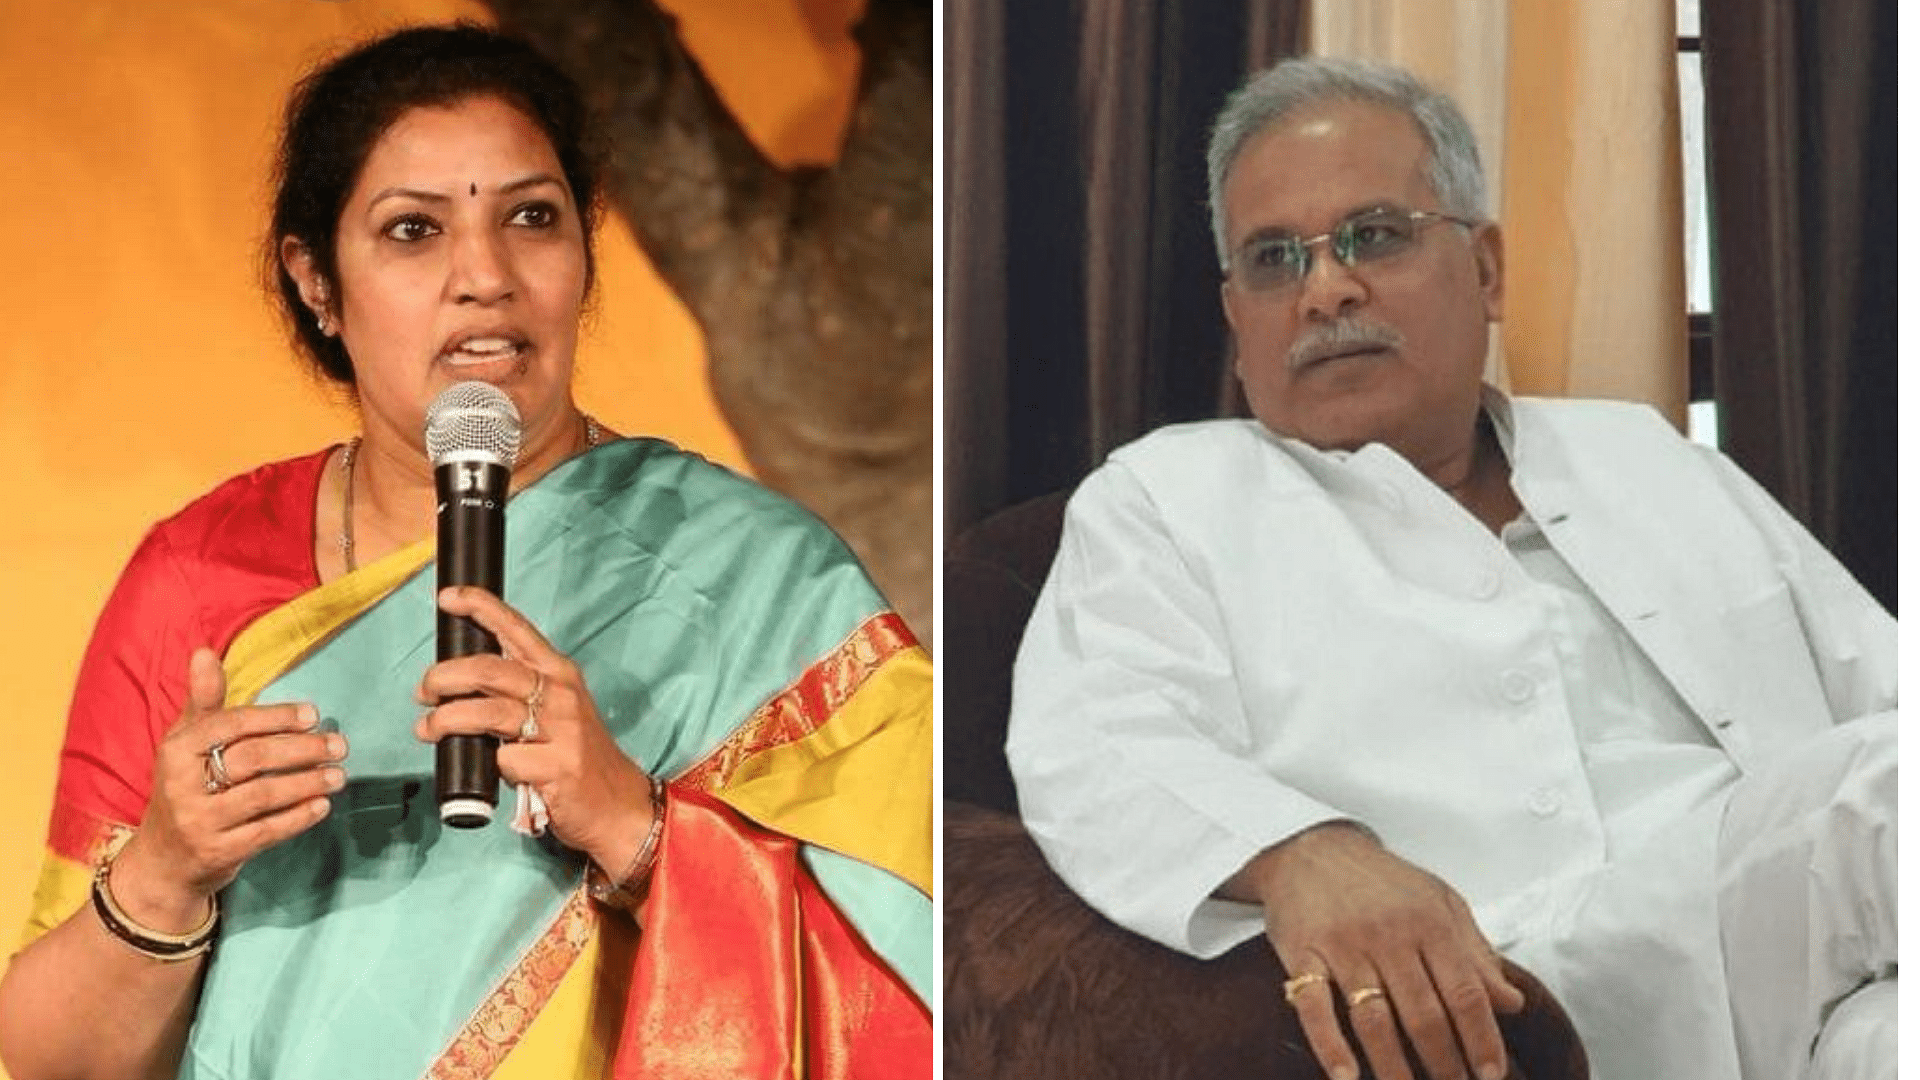 <div class="paragraphs"><p>BJP General Secretary D Purandeswari said that if her party works "spit", the Congress-led Cabinet of Chhattisgarh Chief Minister Bhupesh Baghel will be "swept away" in the next state elections. Image used for representational purposes.&nbsp;</p></div>